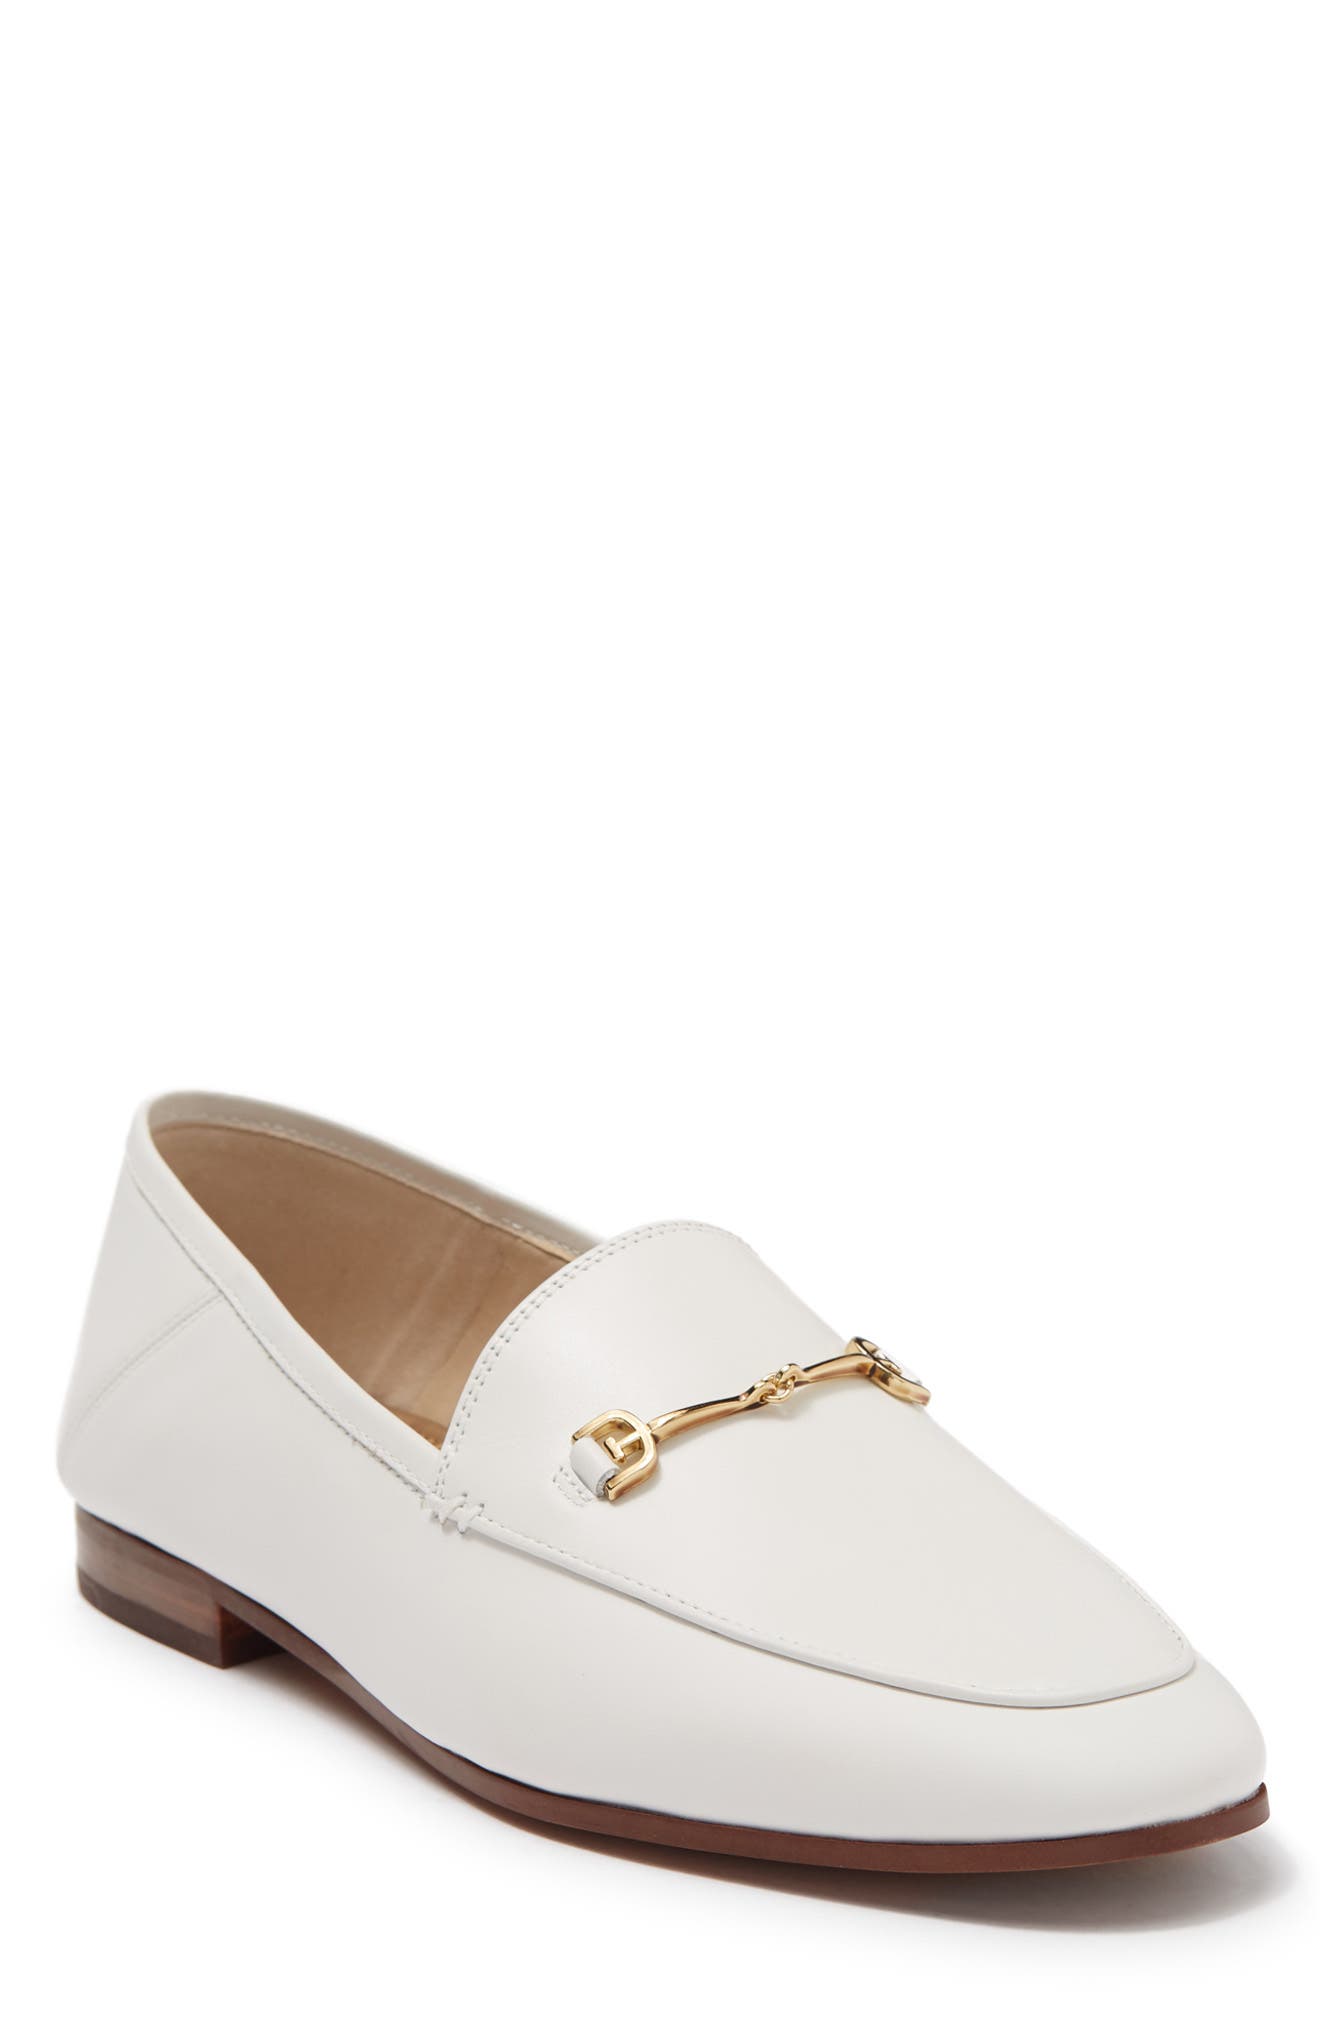 white dress shoes for women